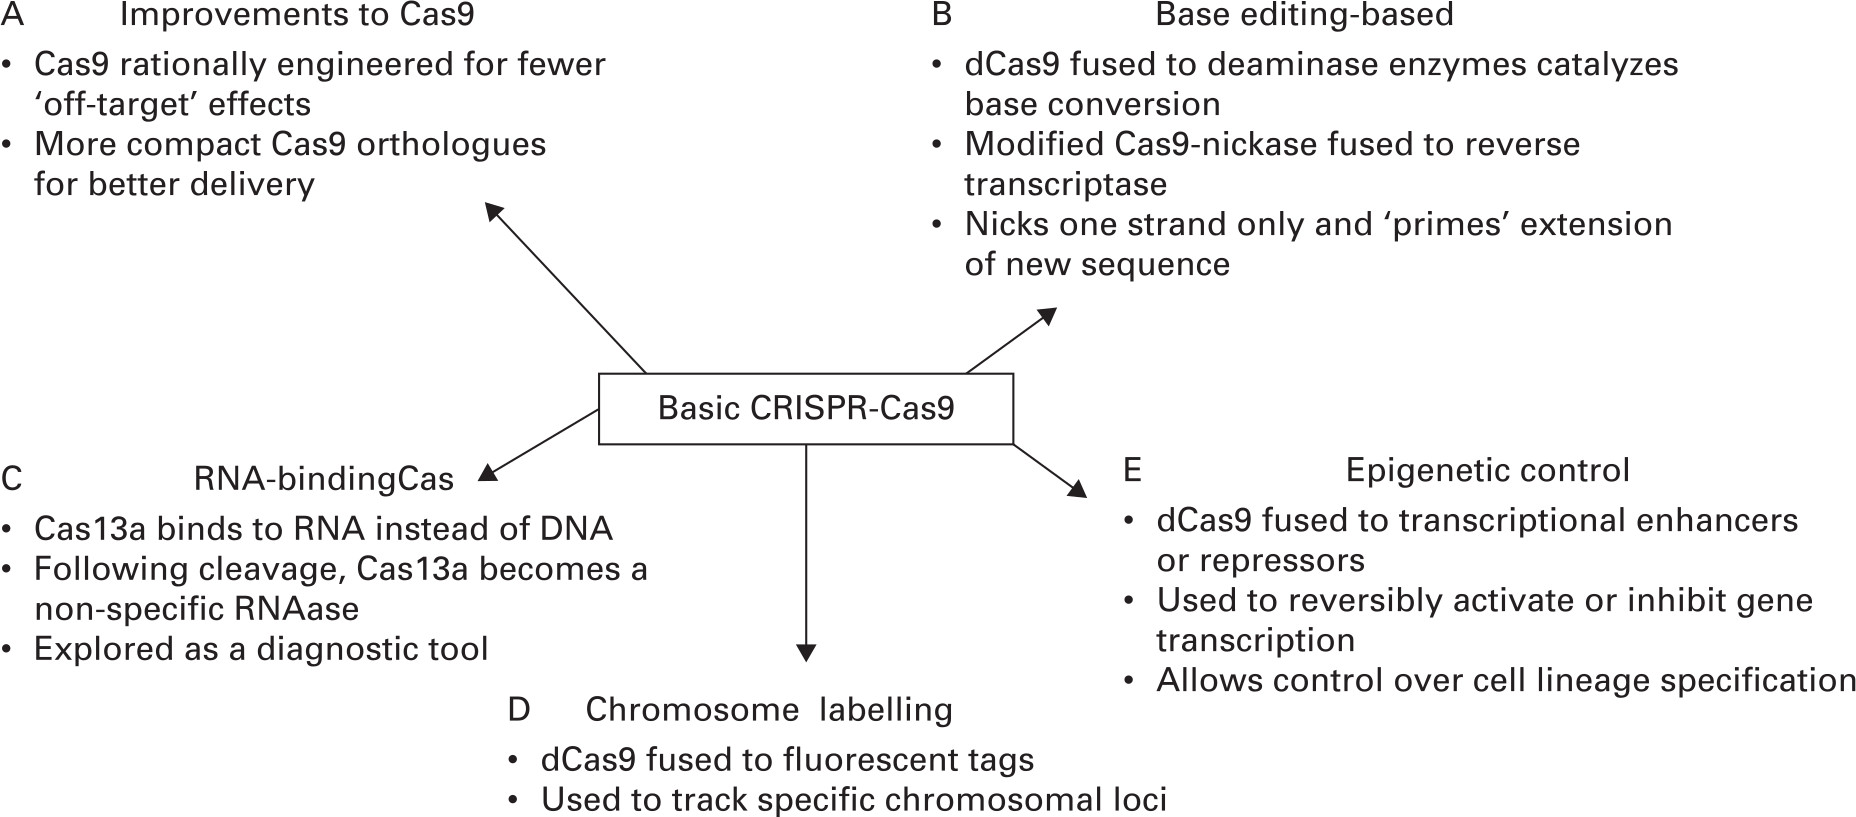 Fig. 2 
          Recent advances in clustered regularly interspaced short palindromic repeats (CRISPR)-Cas9. The CRISPR-Cas9 system and its ability to target specific genomic loci has been adapted for a range of new applications. These include improvements to the Cas9 nuclease itself (A), active or inactive Cas9 fused to different protein modules for enhanced functionality (B, D, and E), and Cas isoforms that have high affinity for RNA instead of DNA (C). These advances have been applied to all the musculoskeletal tissues including cartilage, bone, and muscle.
        